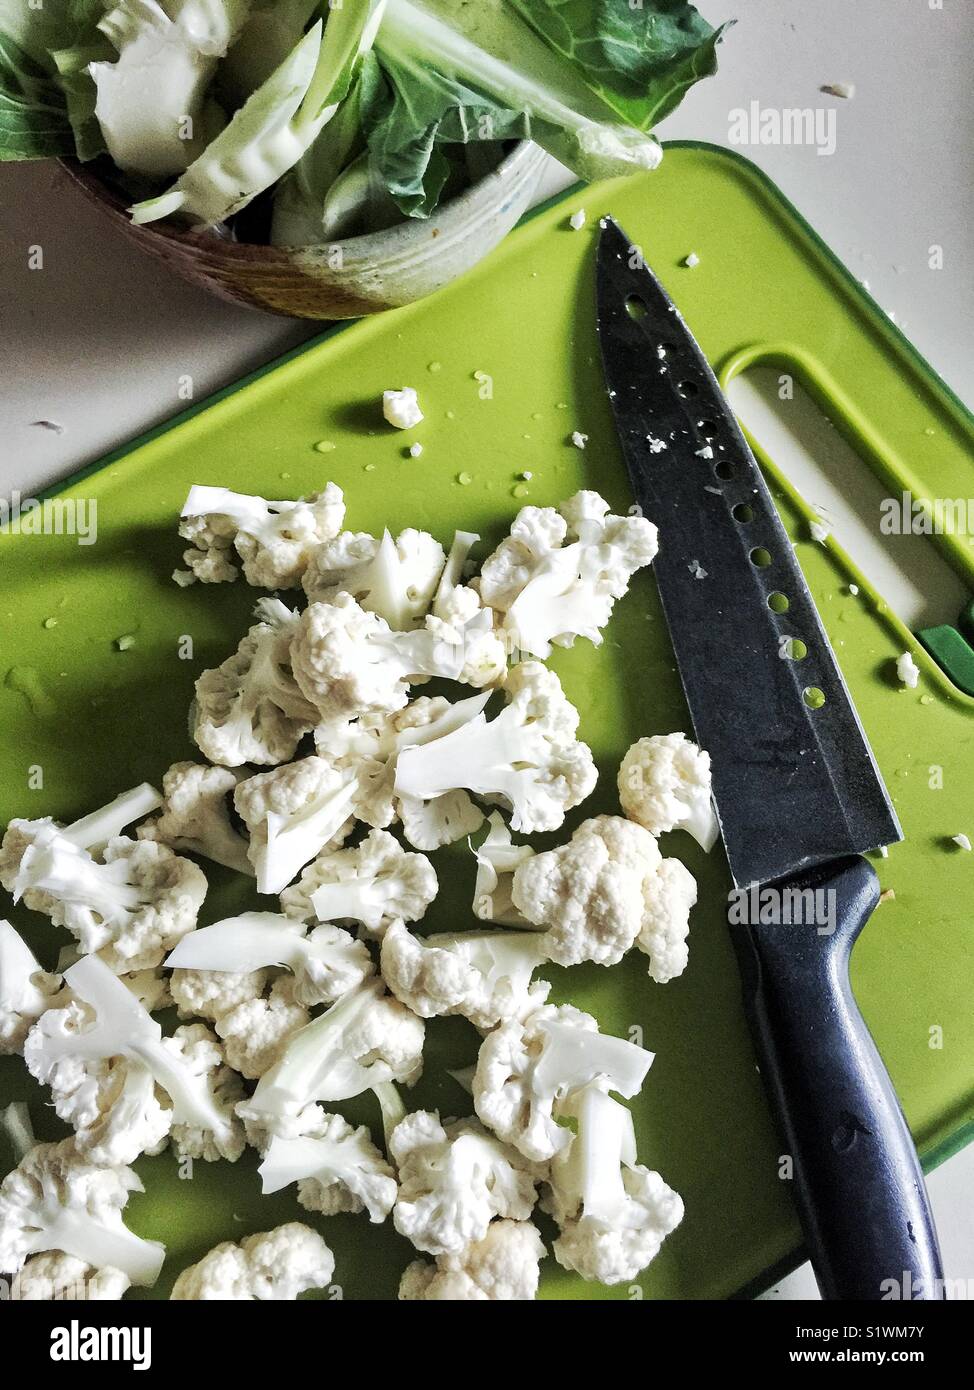 Chopped cauliflower on bright green cutting board next to the chef's knife Stock Photo